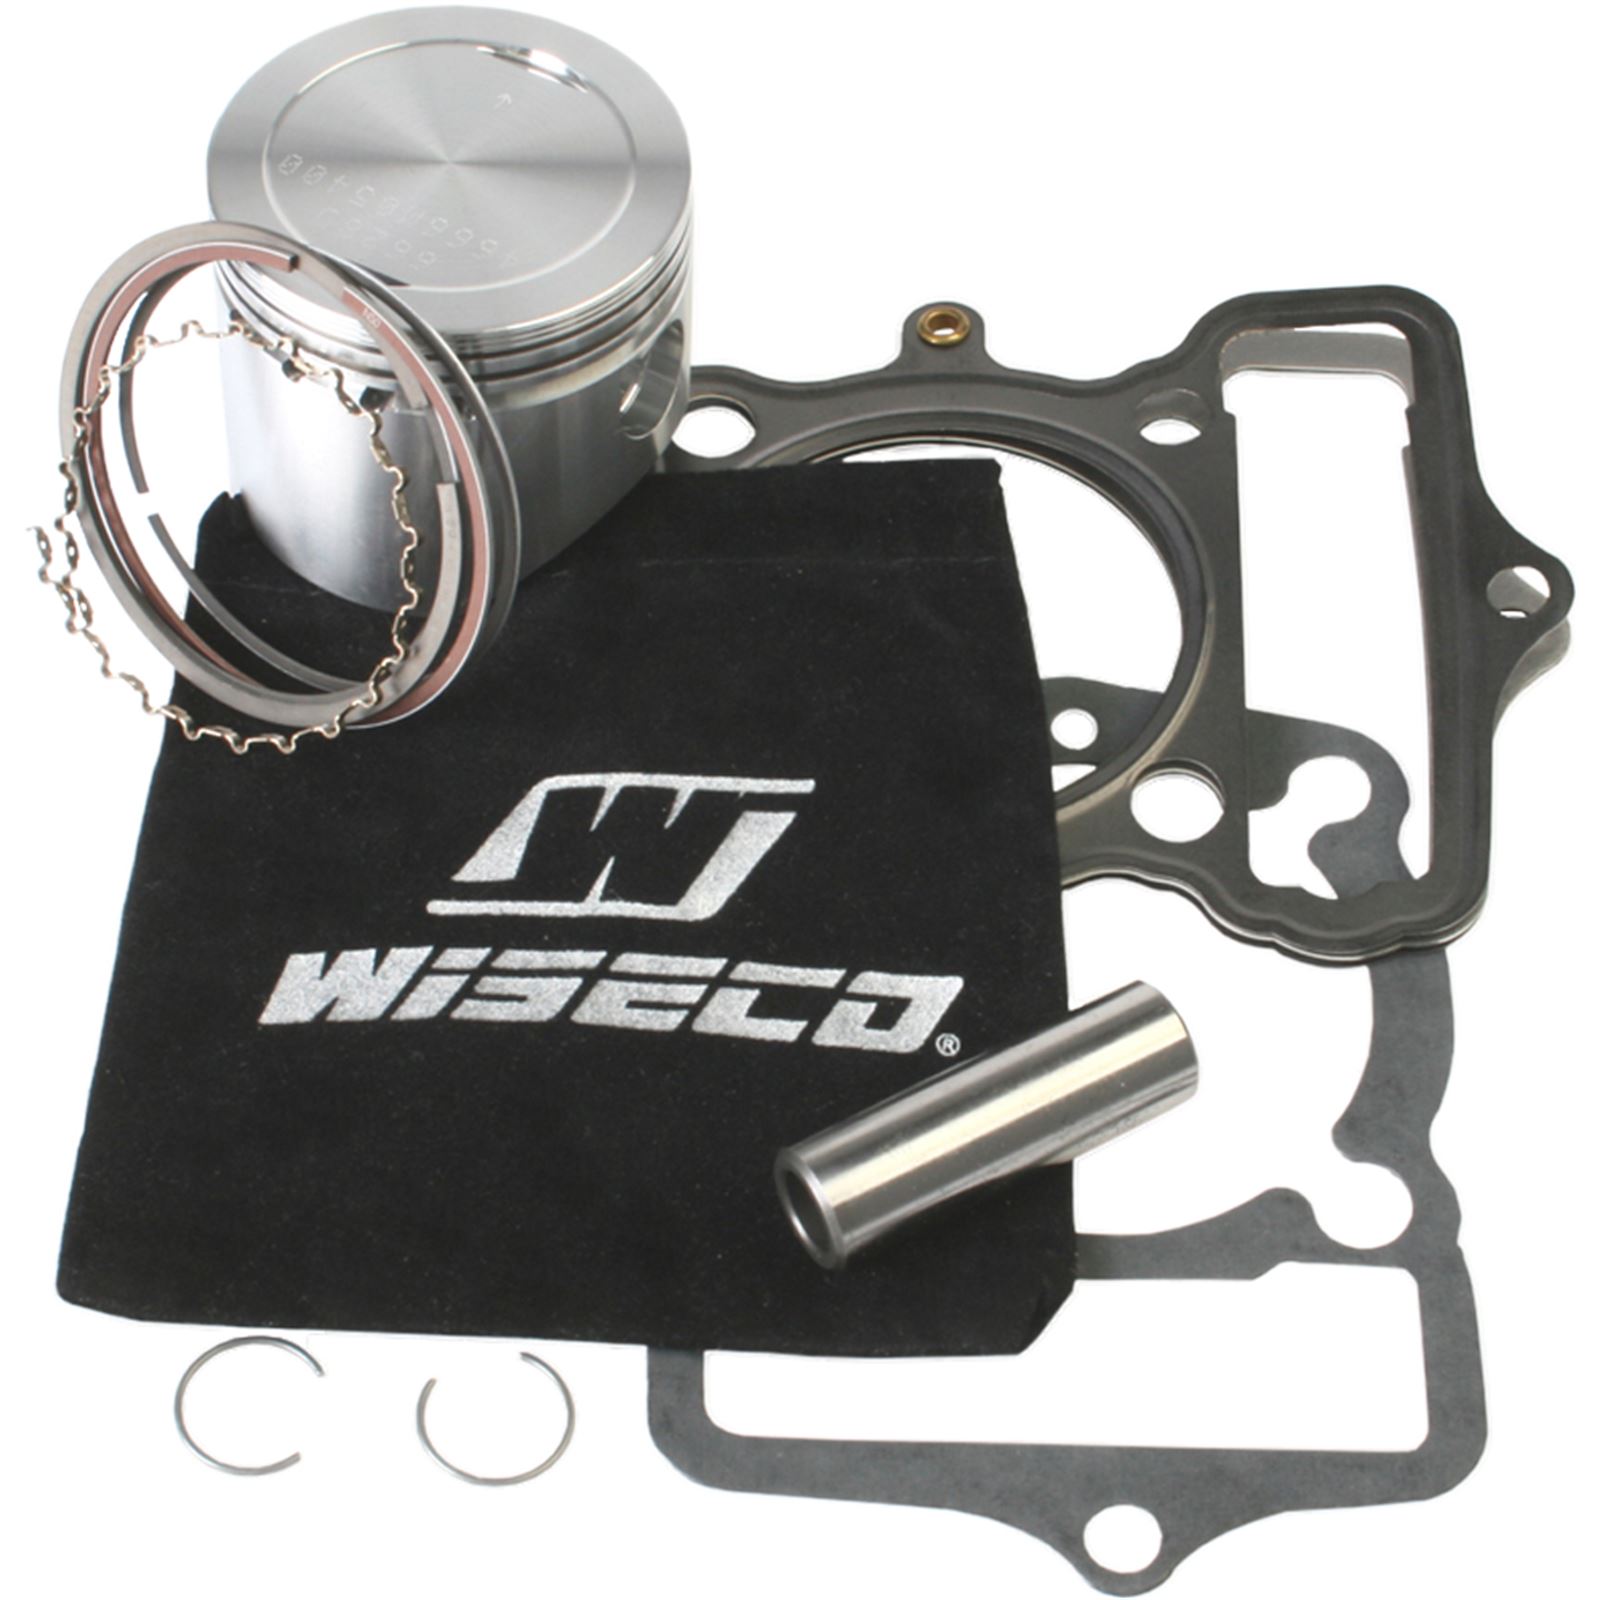 Wiseco PK1164 54.00 mm 2-Stroke Motorcycle Piston Kit with Top-End Gasket Kit 